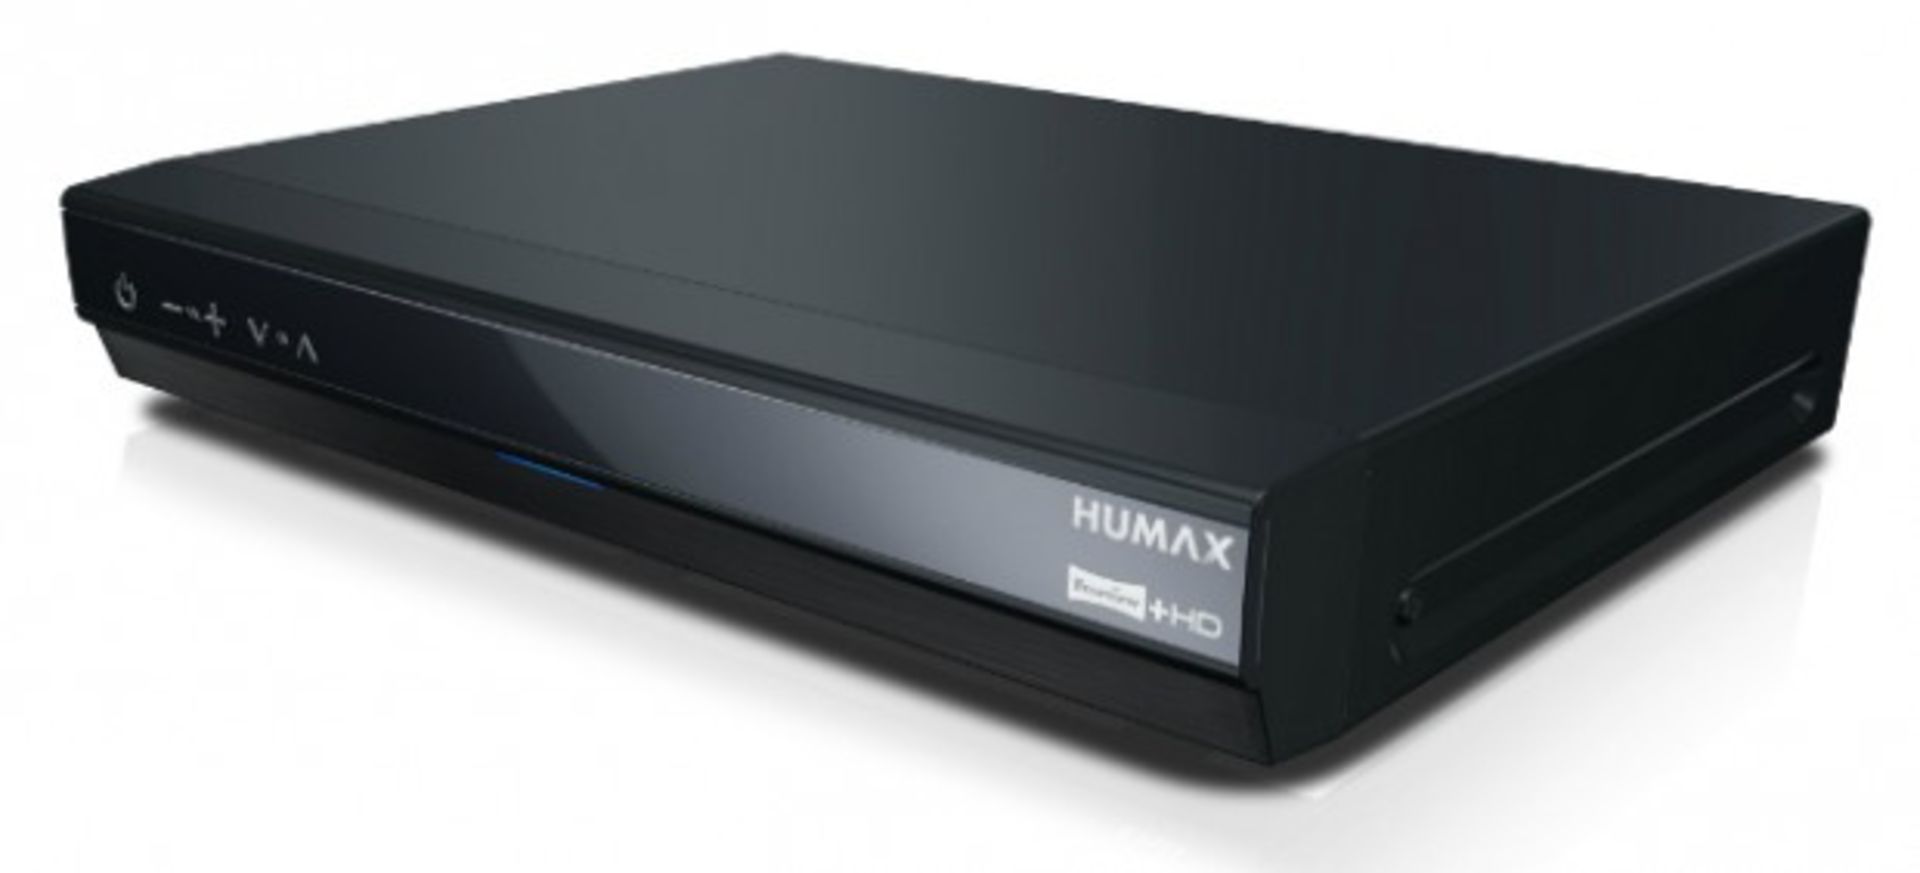 HUMAX HDR-1800T-320 FREEVIEW BOX WITH 320GB HDD